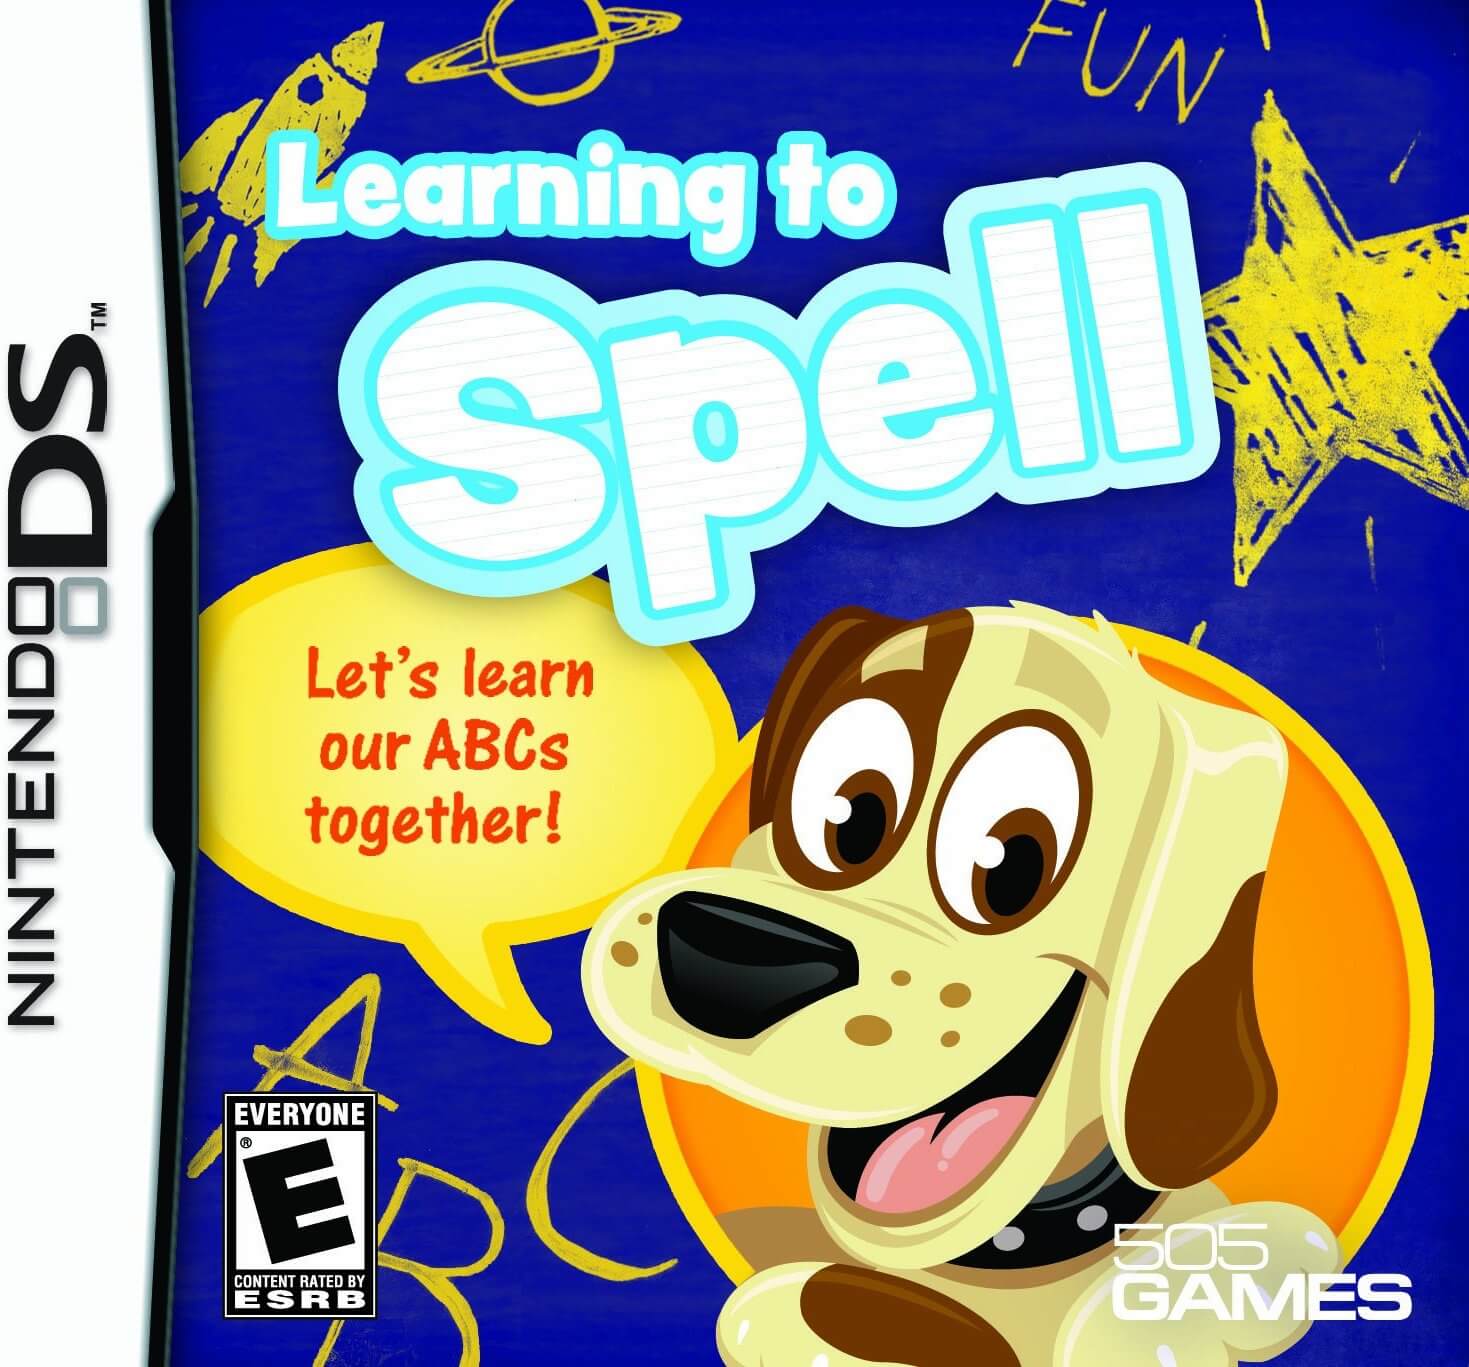 learning-to-spell-nintendods-nds-rom-download